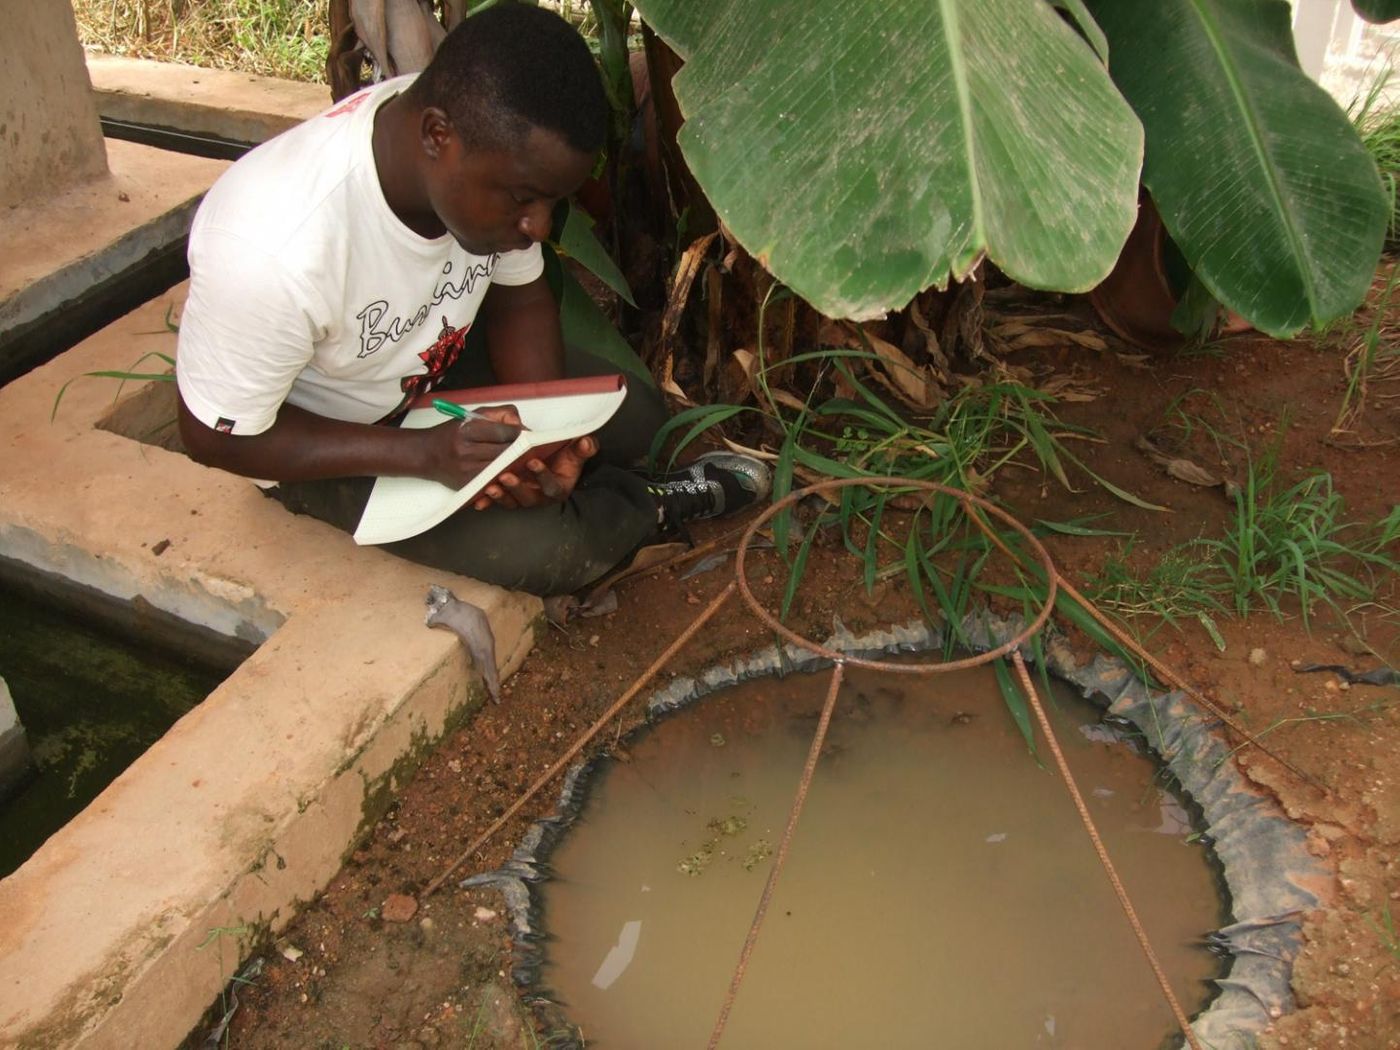 Study co-author Etienne Bilgo observes one of the breeding pools in MosquitoSphere where researchers found that the simple application of a transgenic fungus on a hanging black sheet safely reduced mosquito populations by more than 99%. / Credit: Oliver Zida